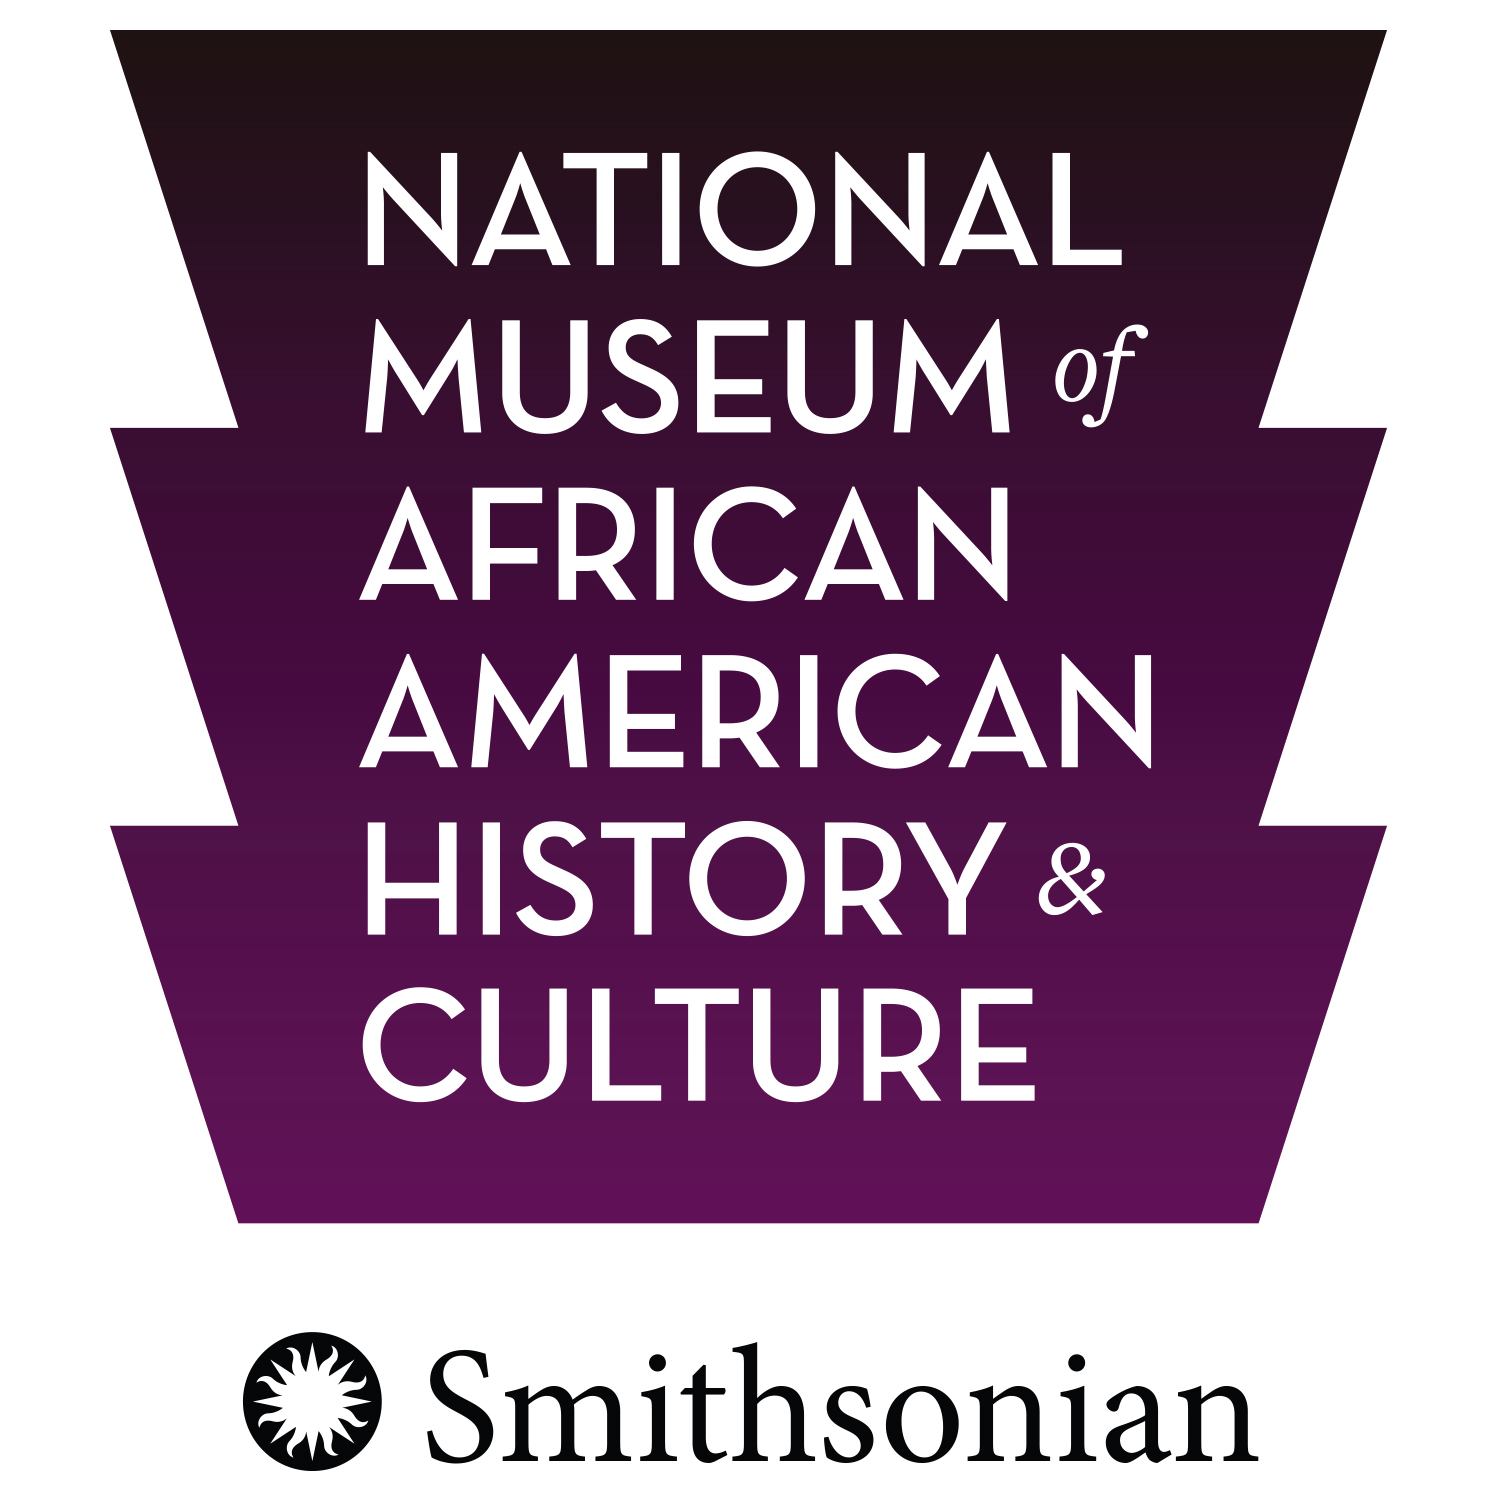 Smithsonian National Museum of African American History and Culture collections